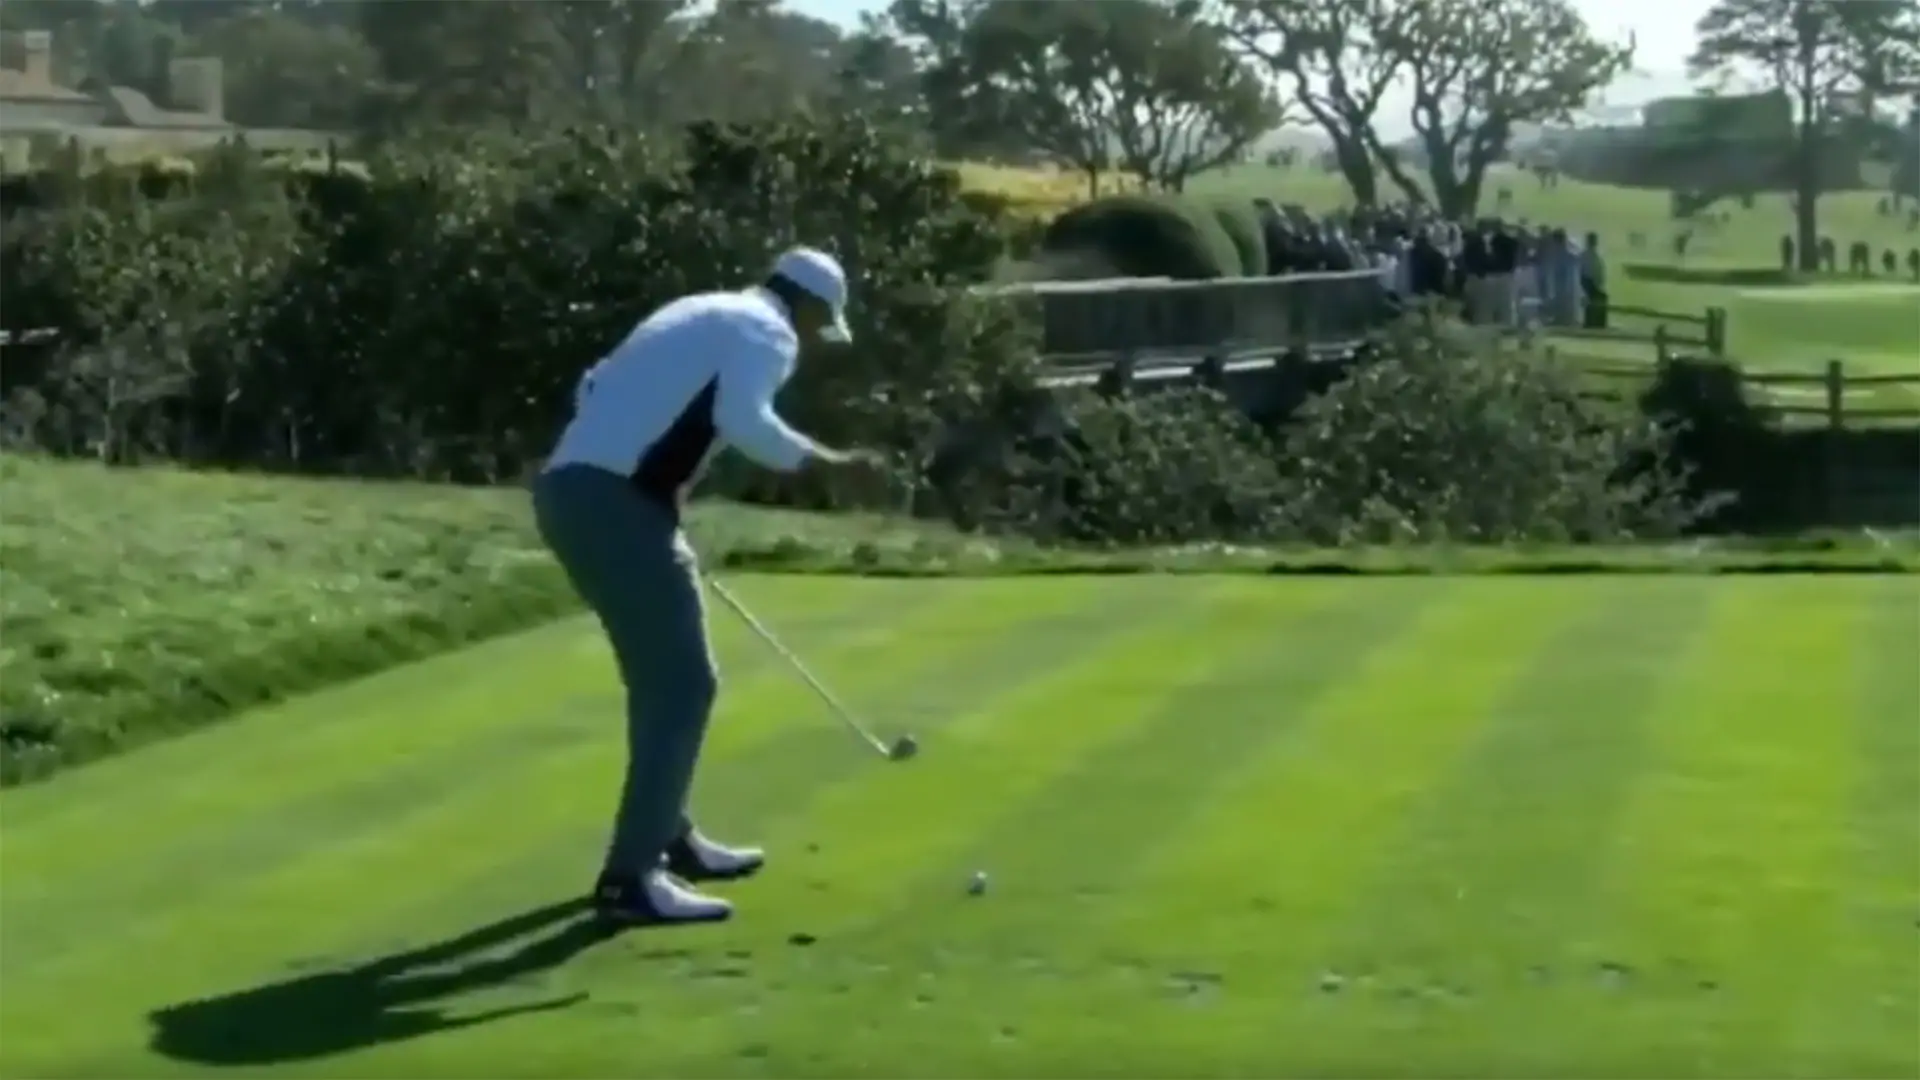 Watch: Romano nearly beans Spieth with errant shot